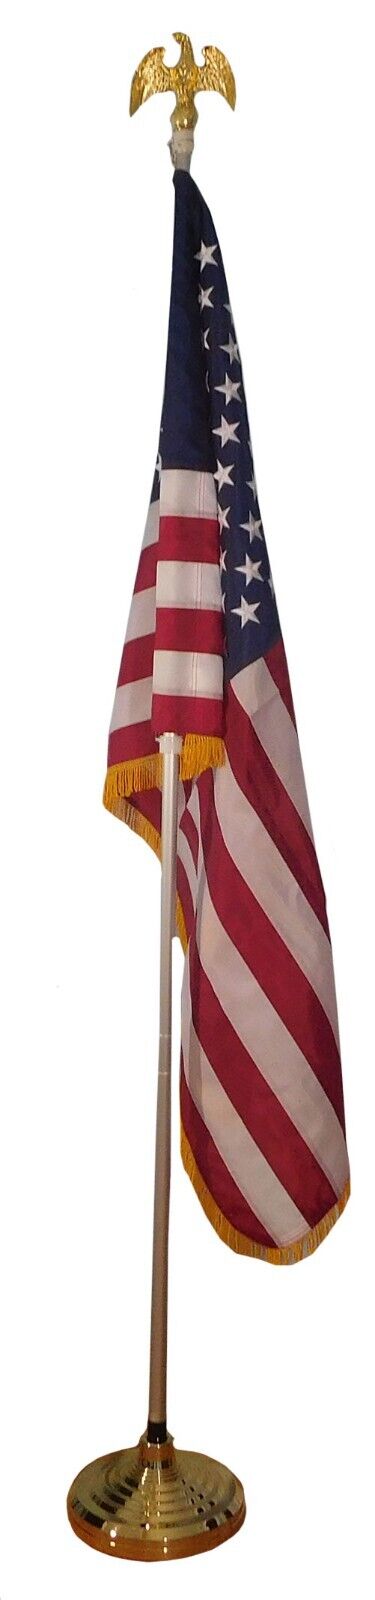 American Telescoping Gold Indoor Flagpole 8' Telescoping American Pole Only & Gold Eagle